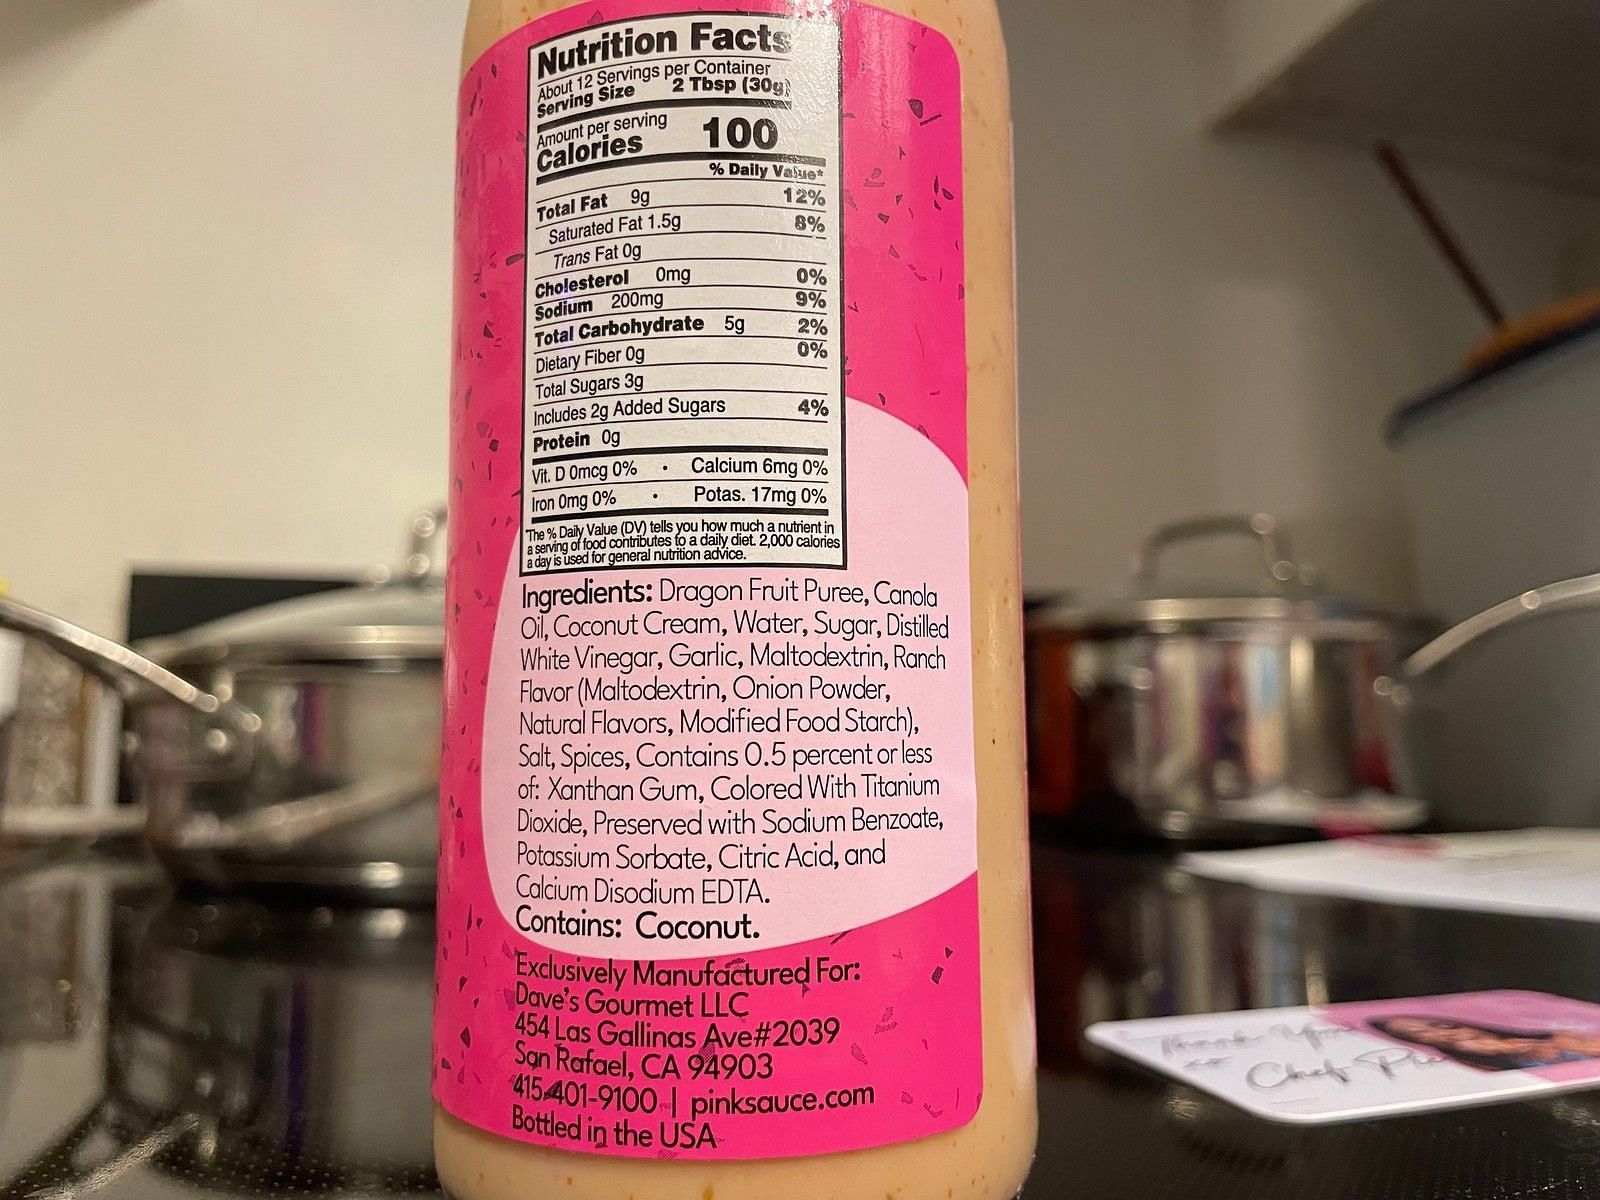 Dave&#039;s Gourmet mentioned the required information about the nutrients information, etc. which was previously missing from the bottle. (Image via Twitter)